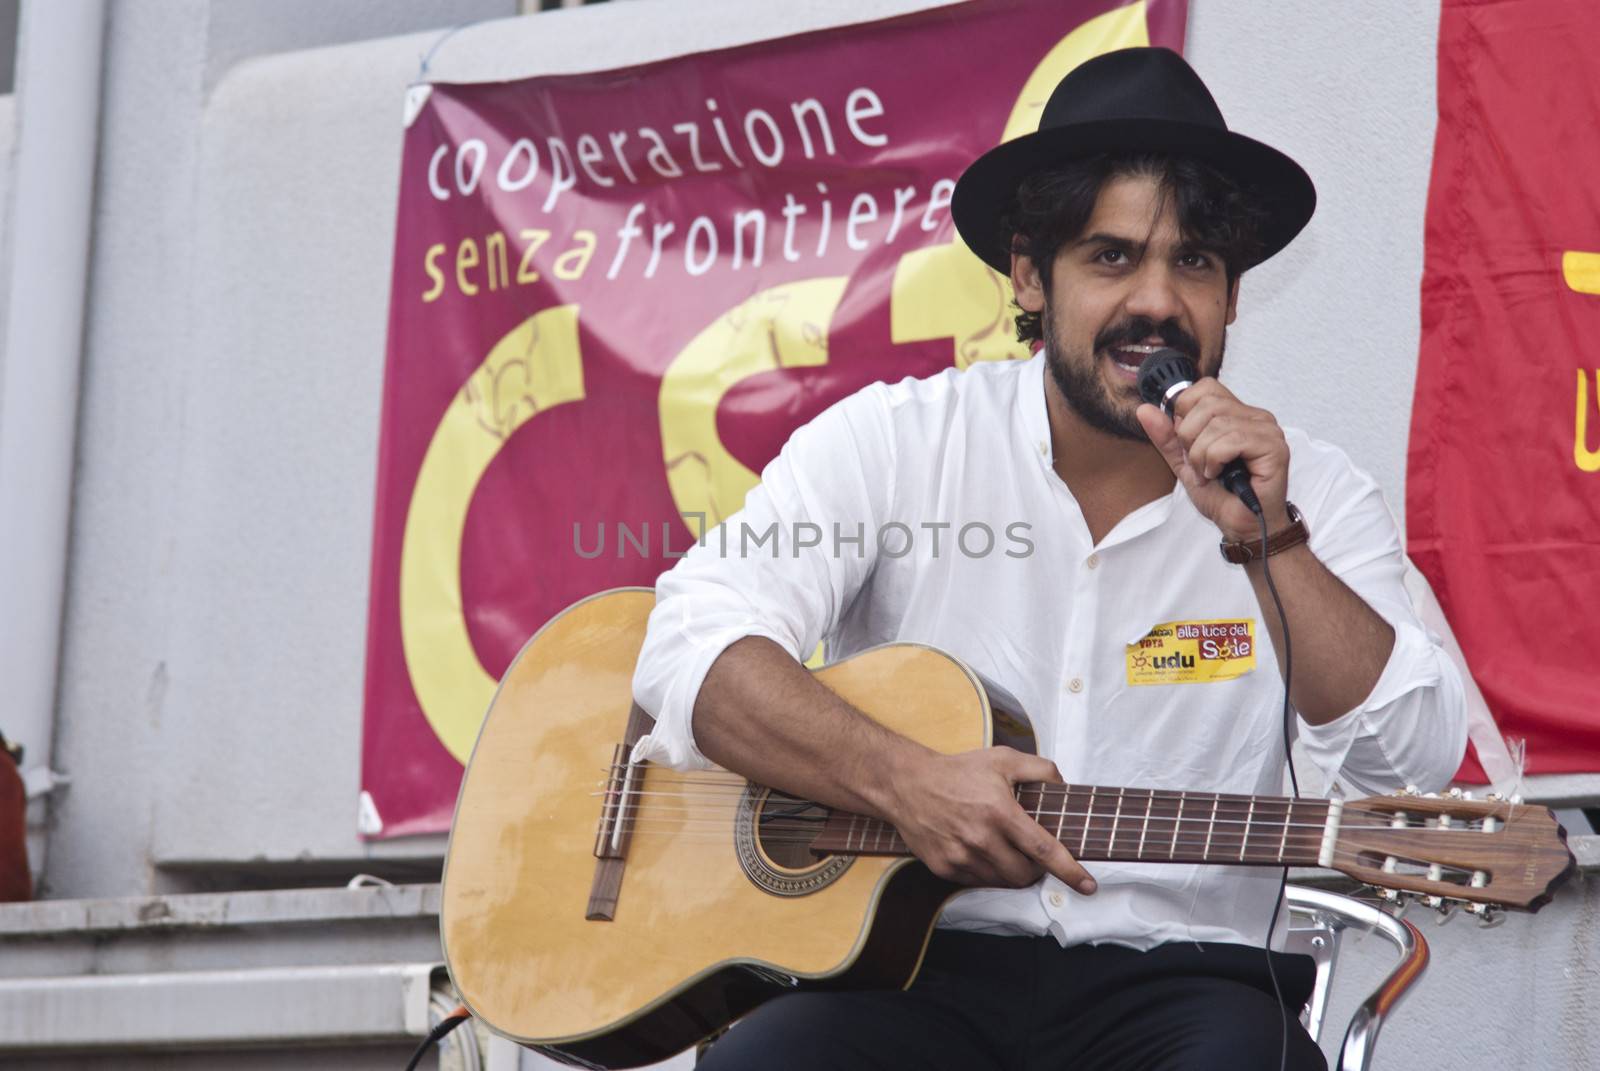 PALERMO APRIL 26- The singer Alessandro Mannarino was invited by UDU Palermo - Union of University Students - to participate in a meeting with students on april 26, 2013 in Palermo, Italy